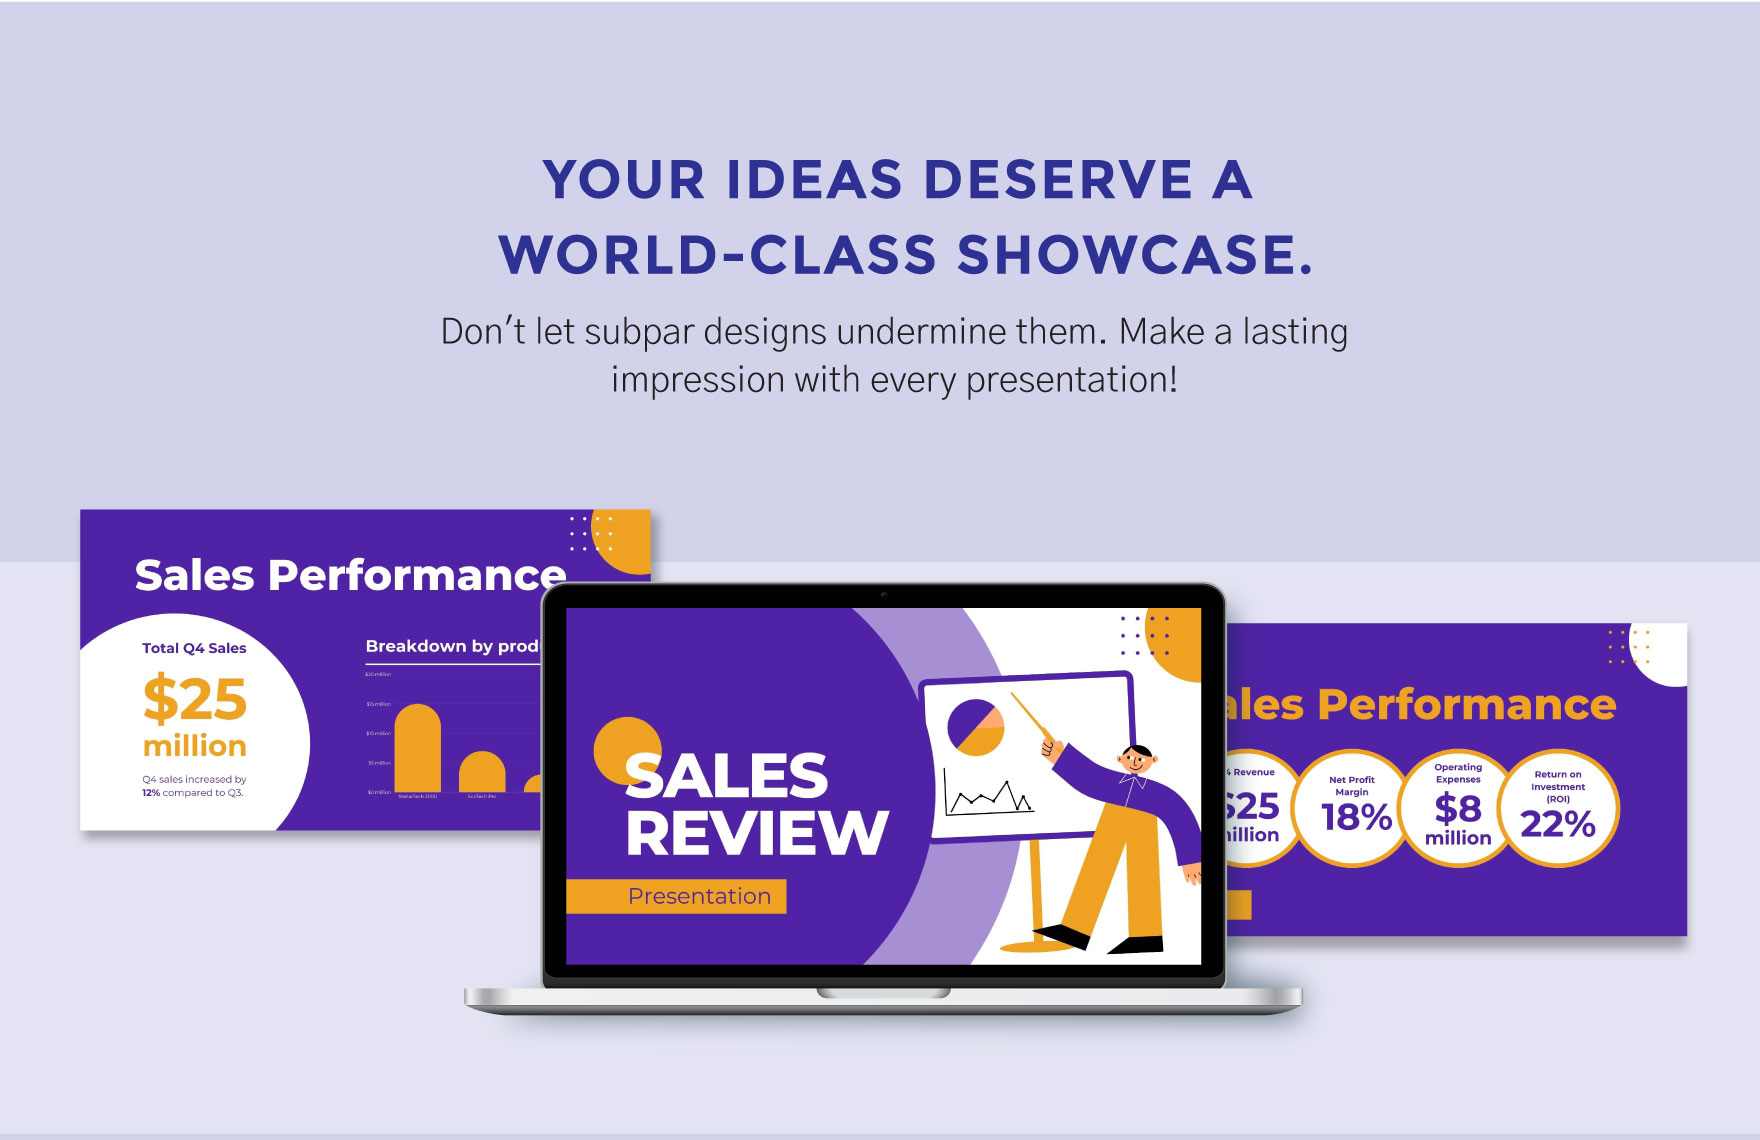 Sales Review Presentation Template